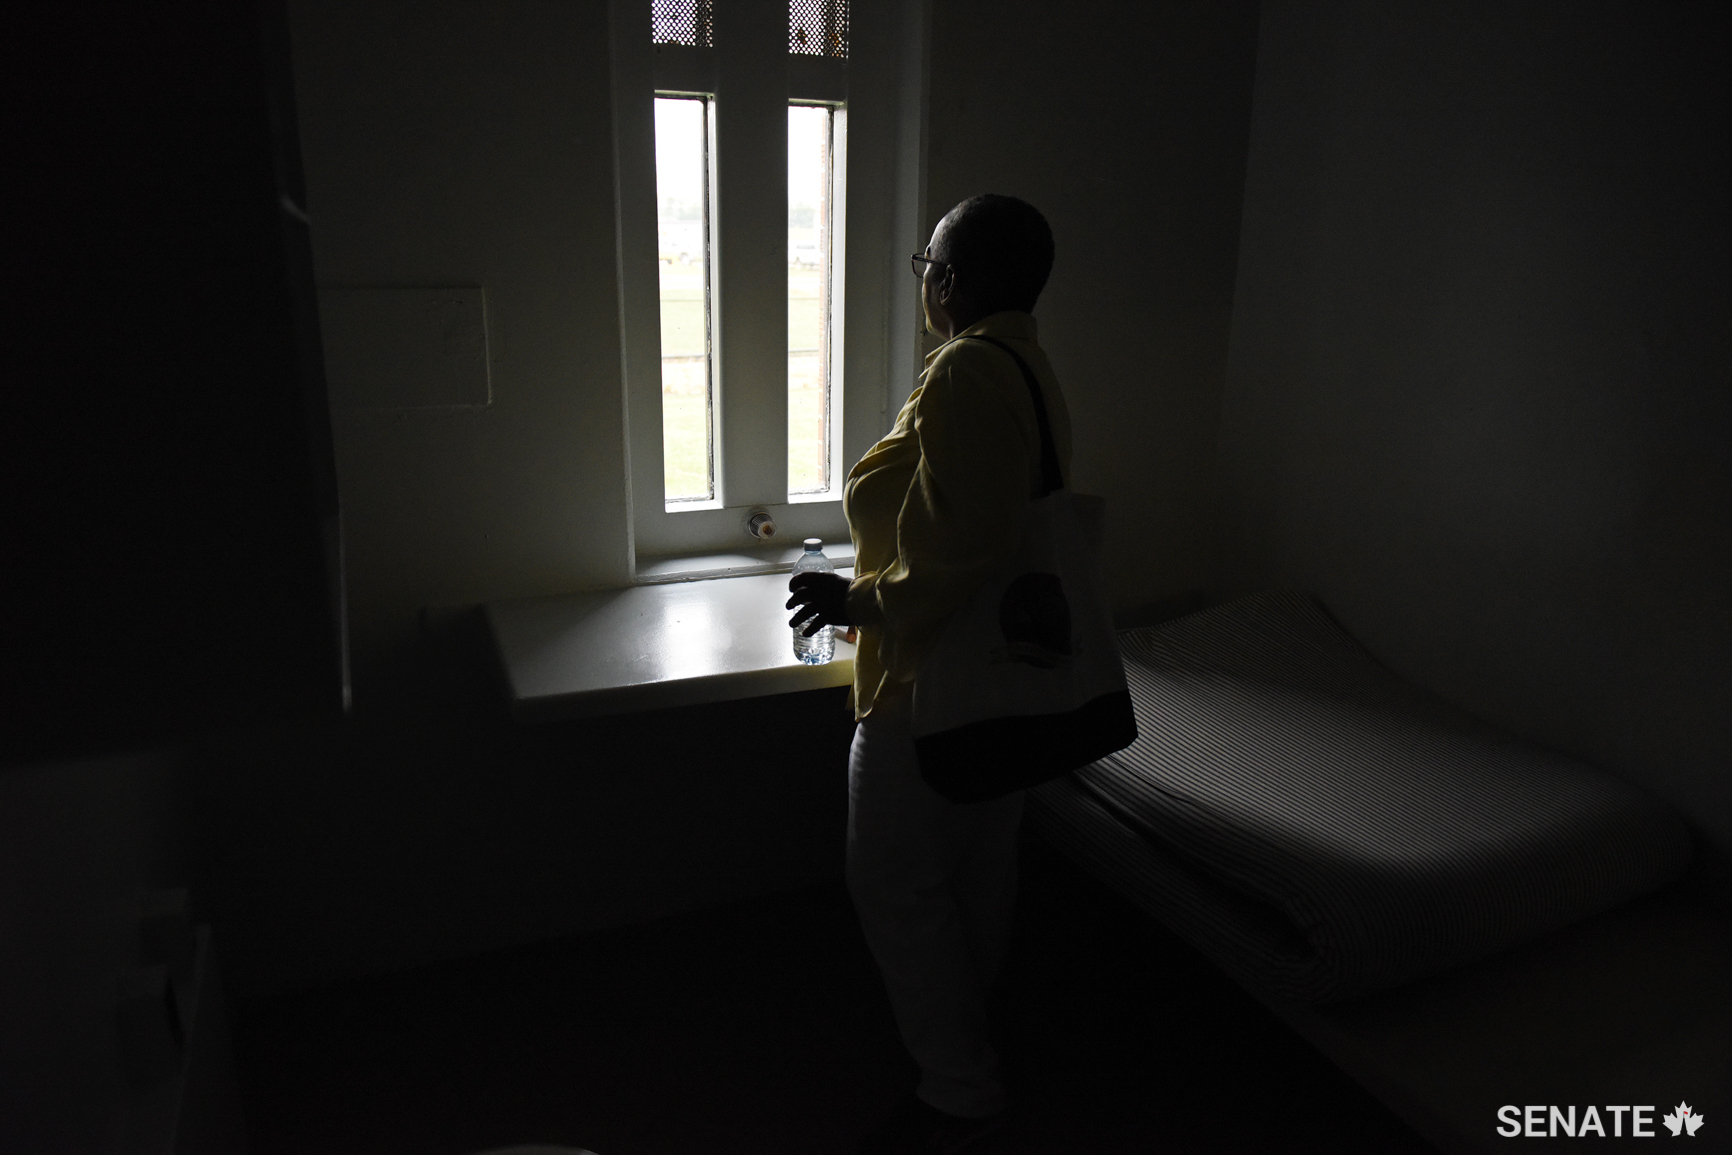 Senator Bernard peers out of a window in a health unit cell. Long wait times for prisoners to see doctors and dentists, and a lack of mental health services are consistent themes the committee heard.